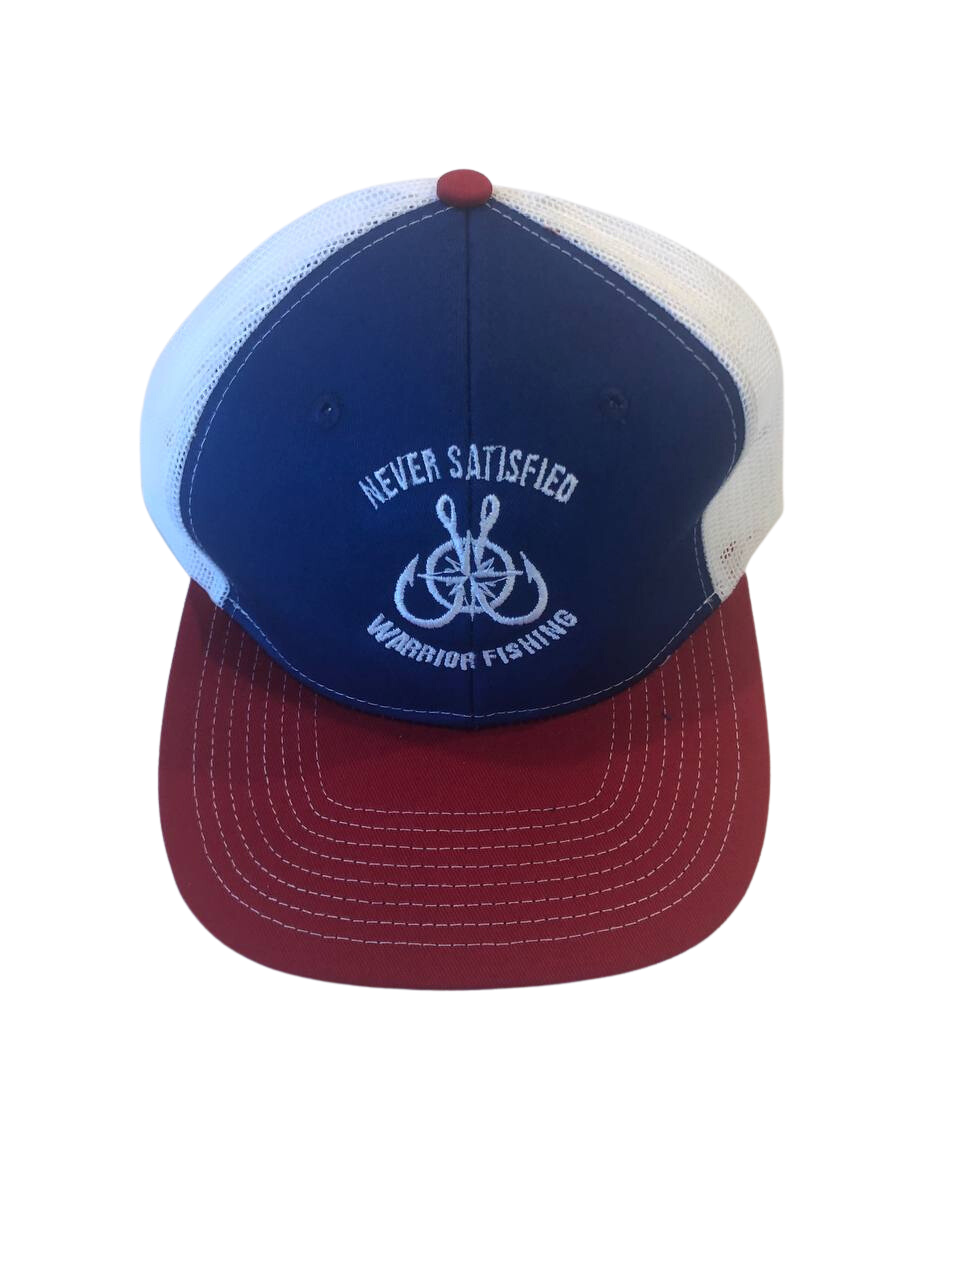 Never Satisfied Warrior Fishing Hat (Red/White/Blue)